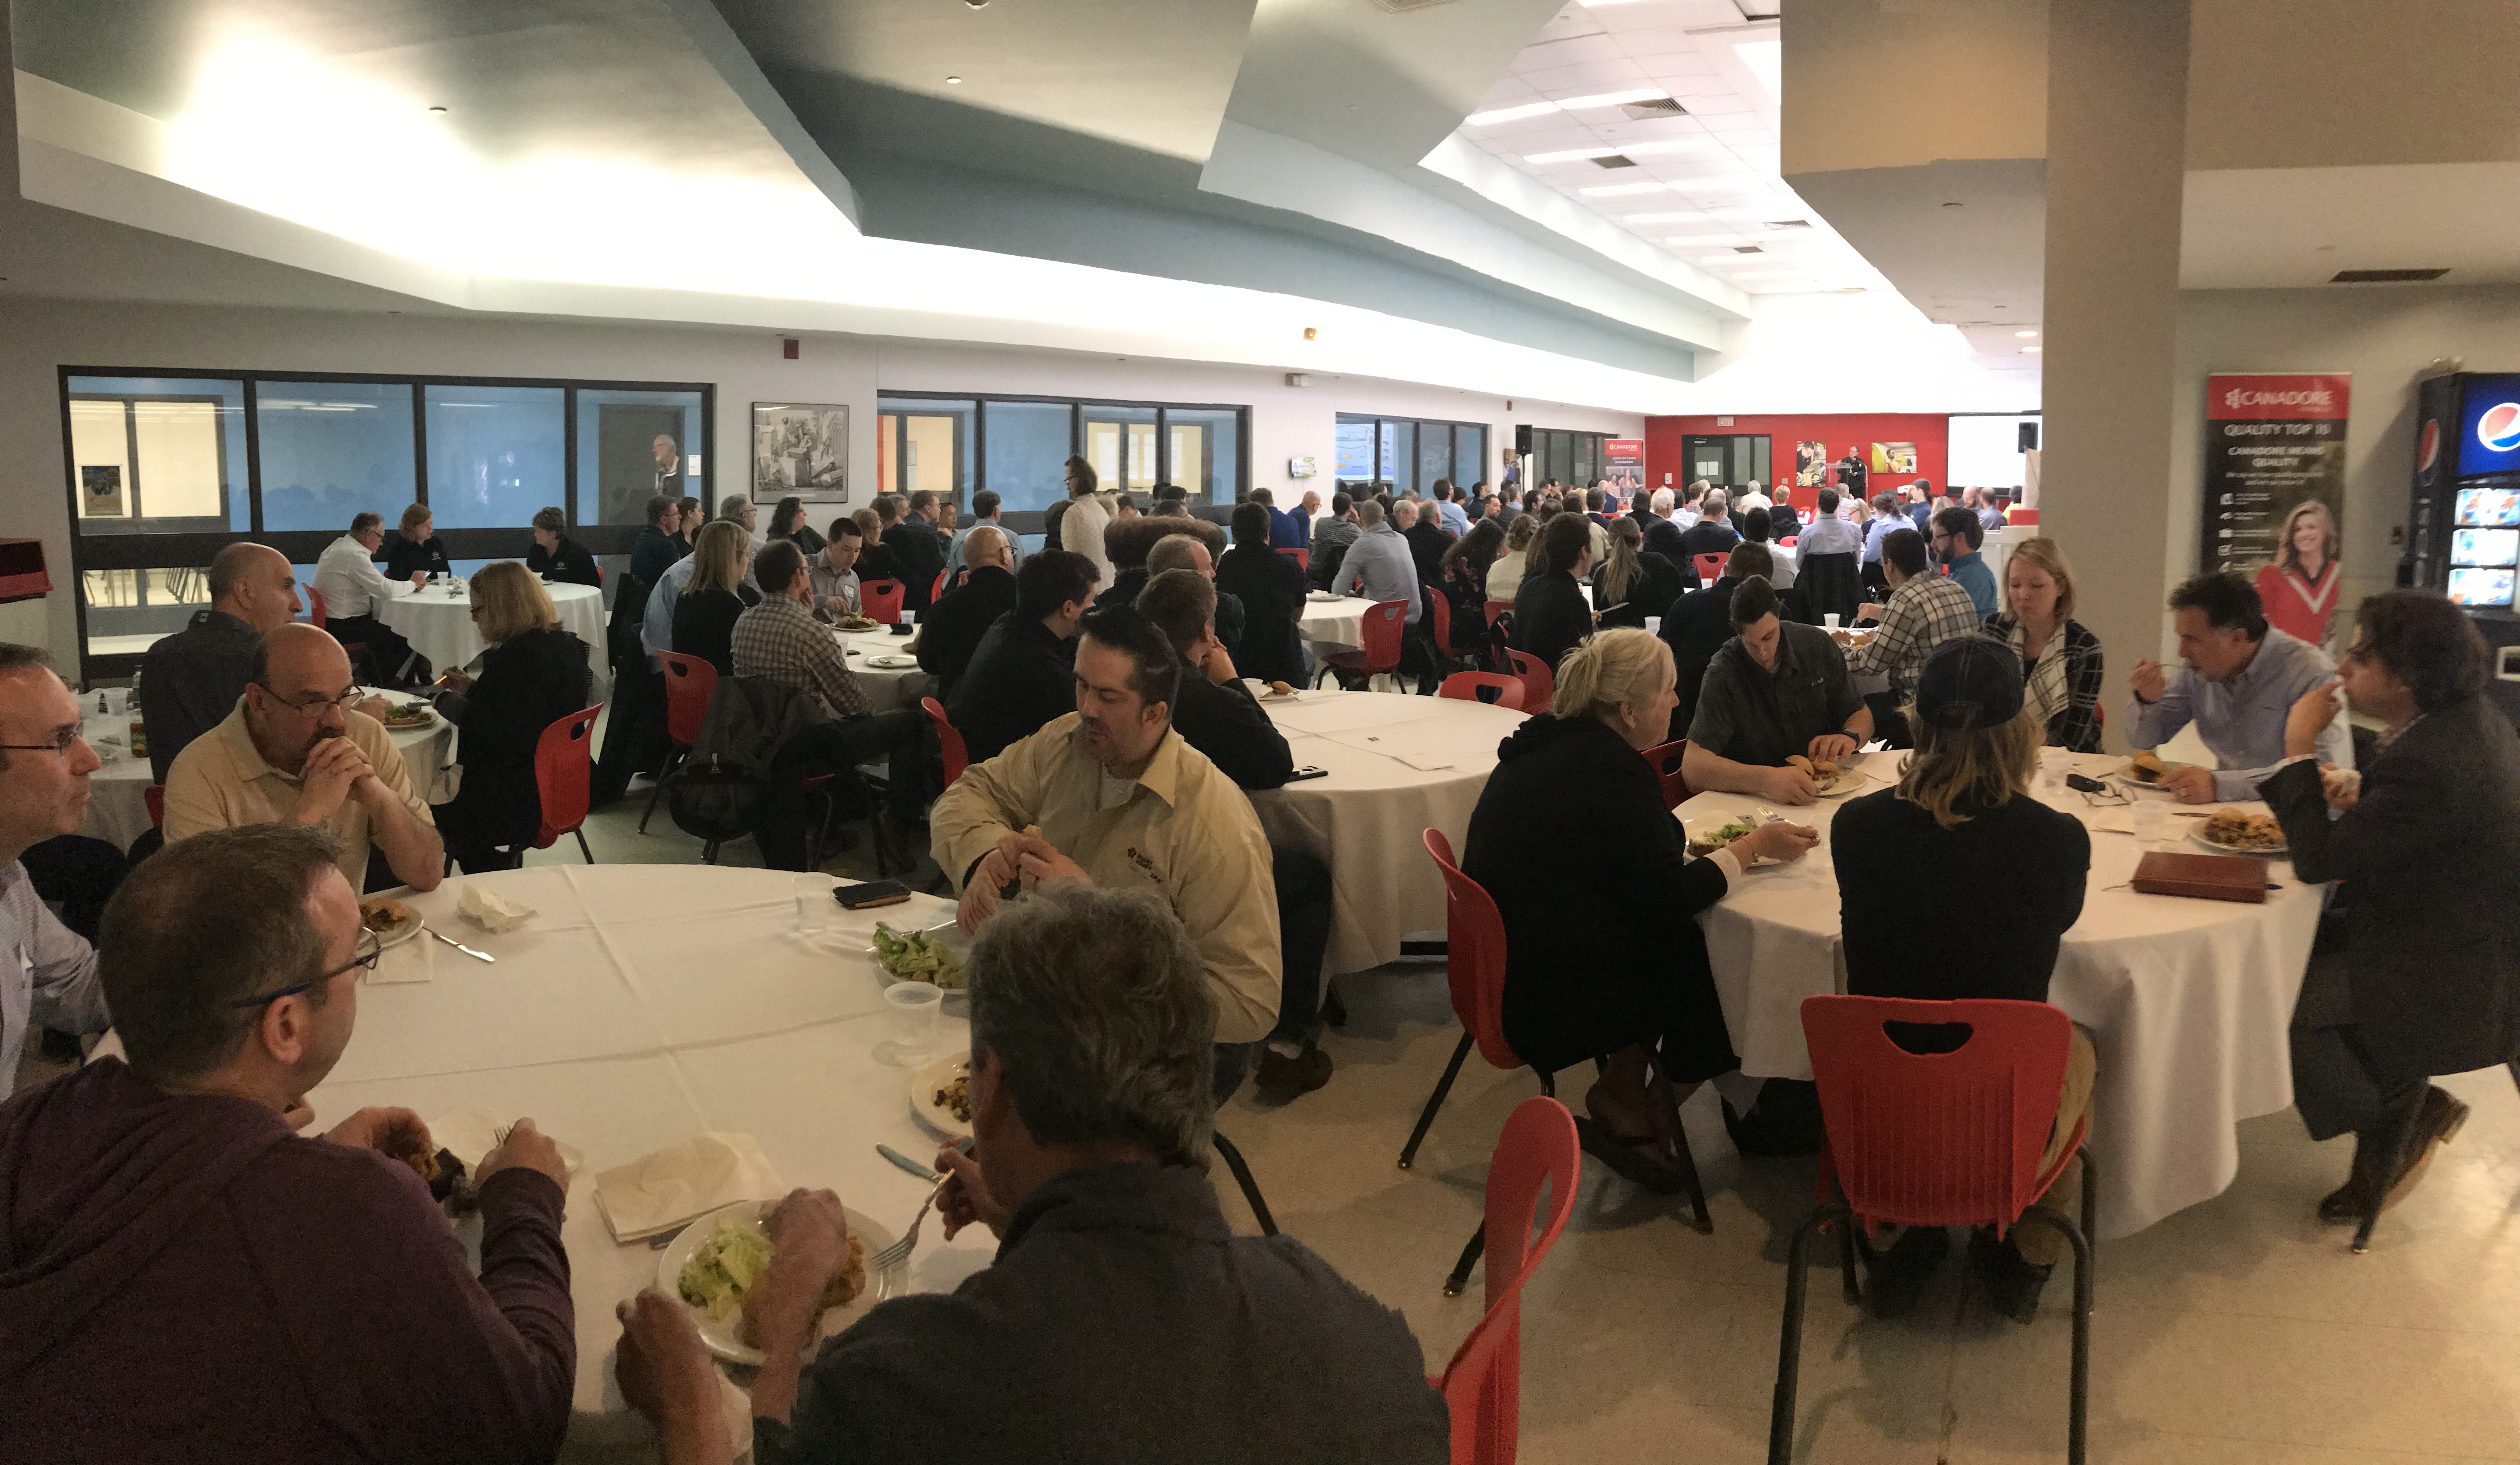 2019-05 Mining Week Mining Showcase - Marilyn Spink Distinguished Lecturer lunch.jpg